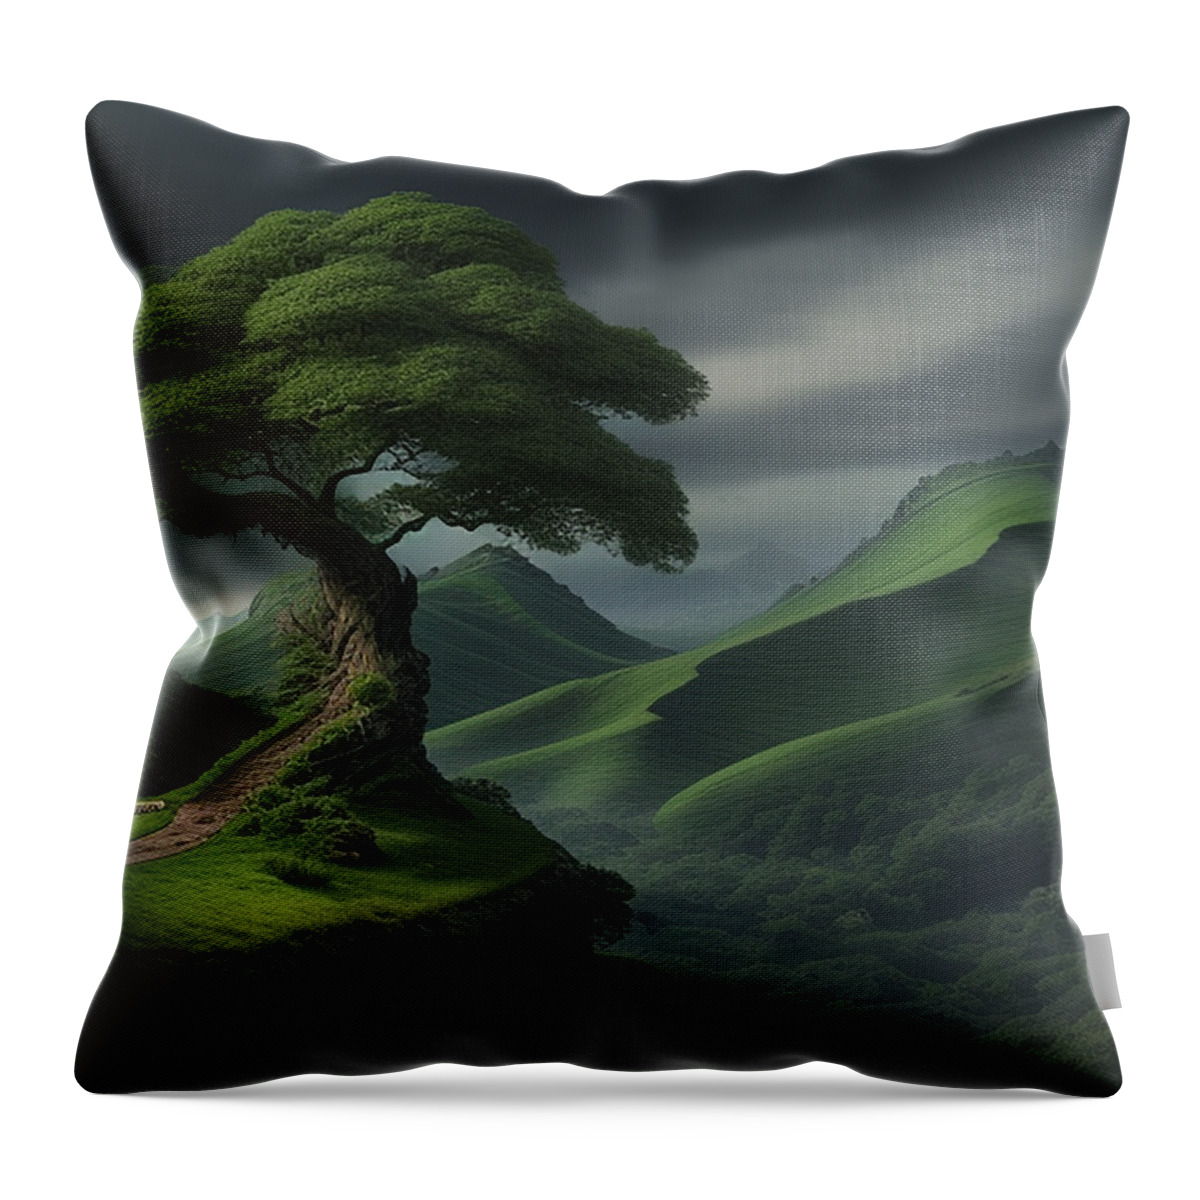 Tree Throw Pillow featuring the digital art The Tree by James Barnes